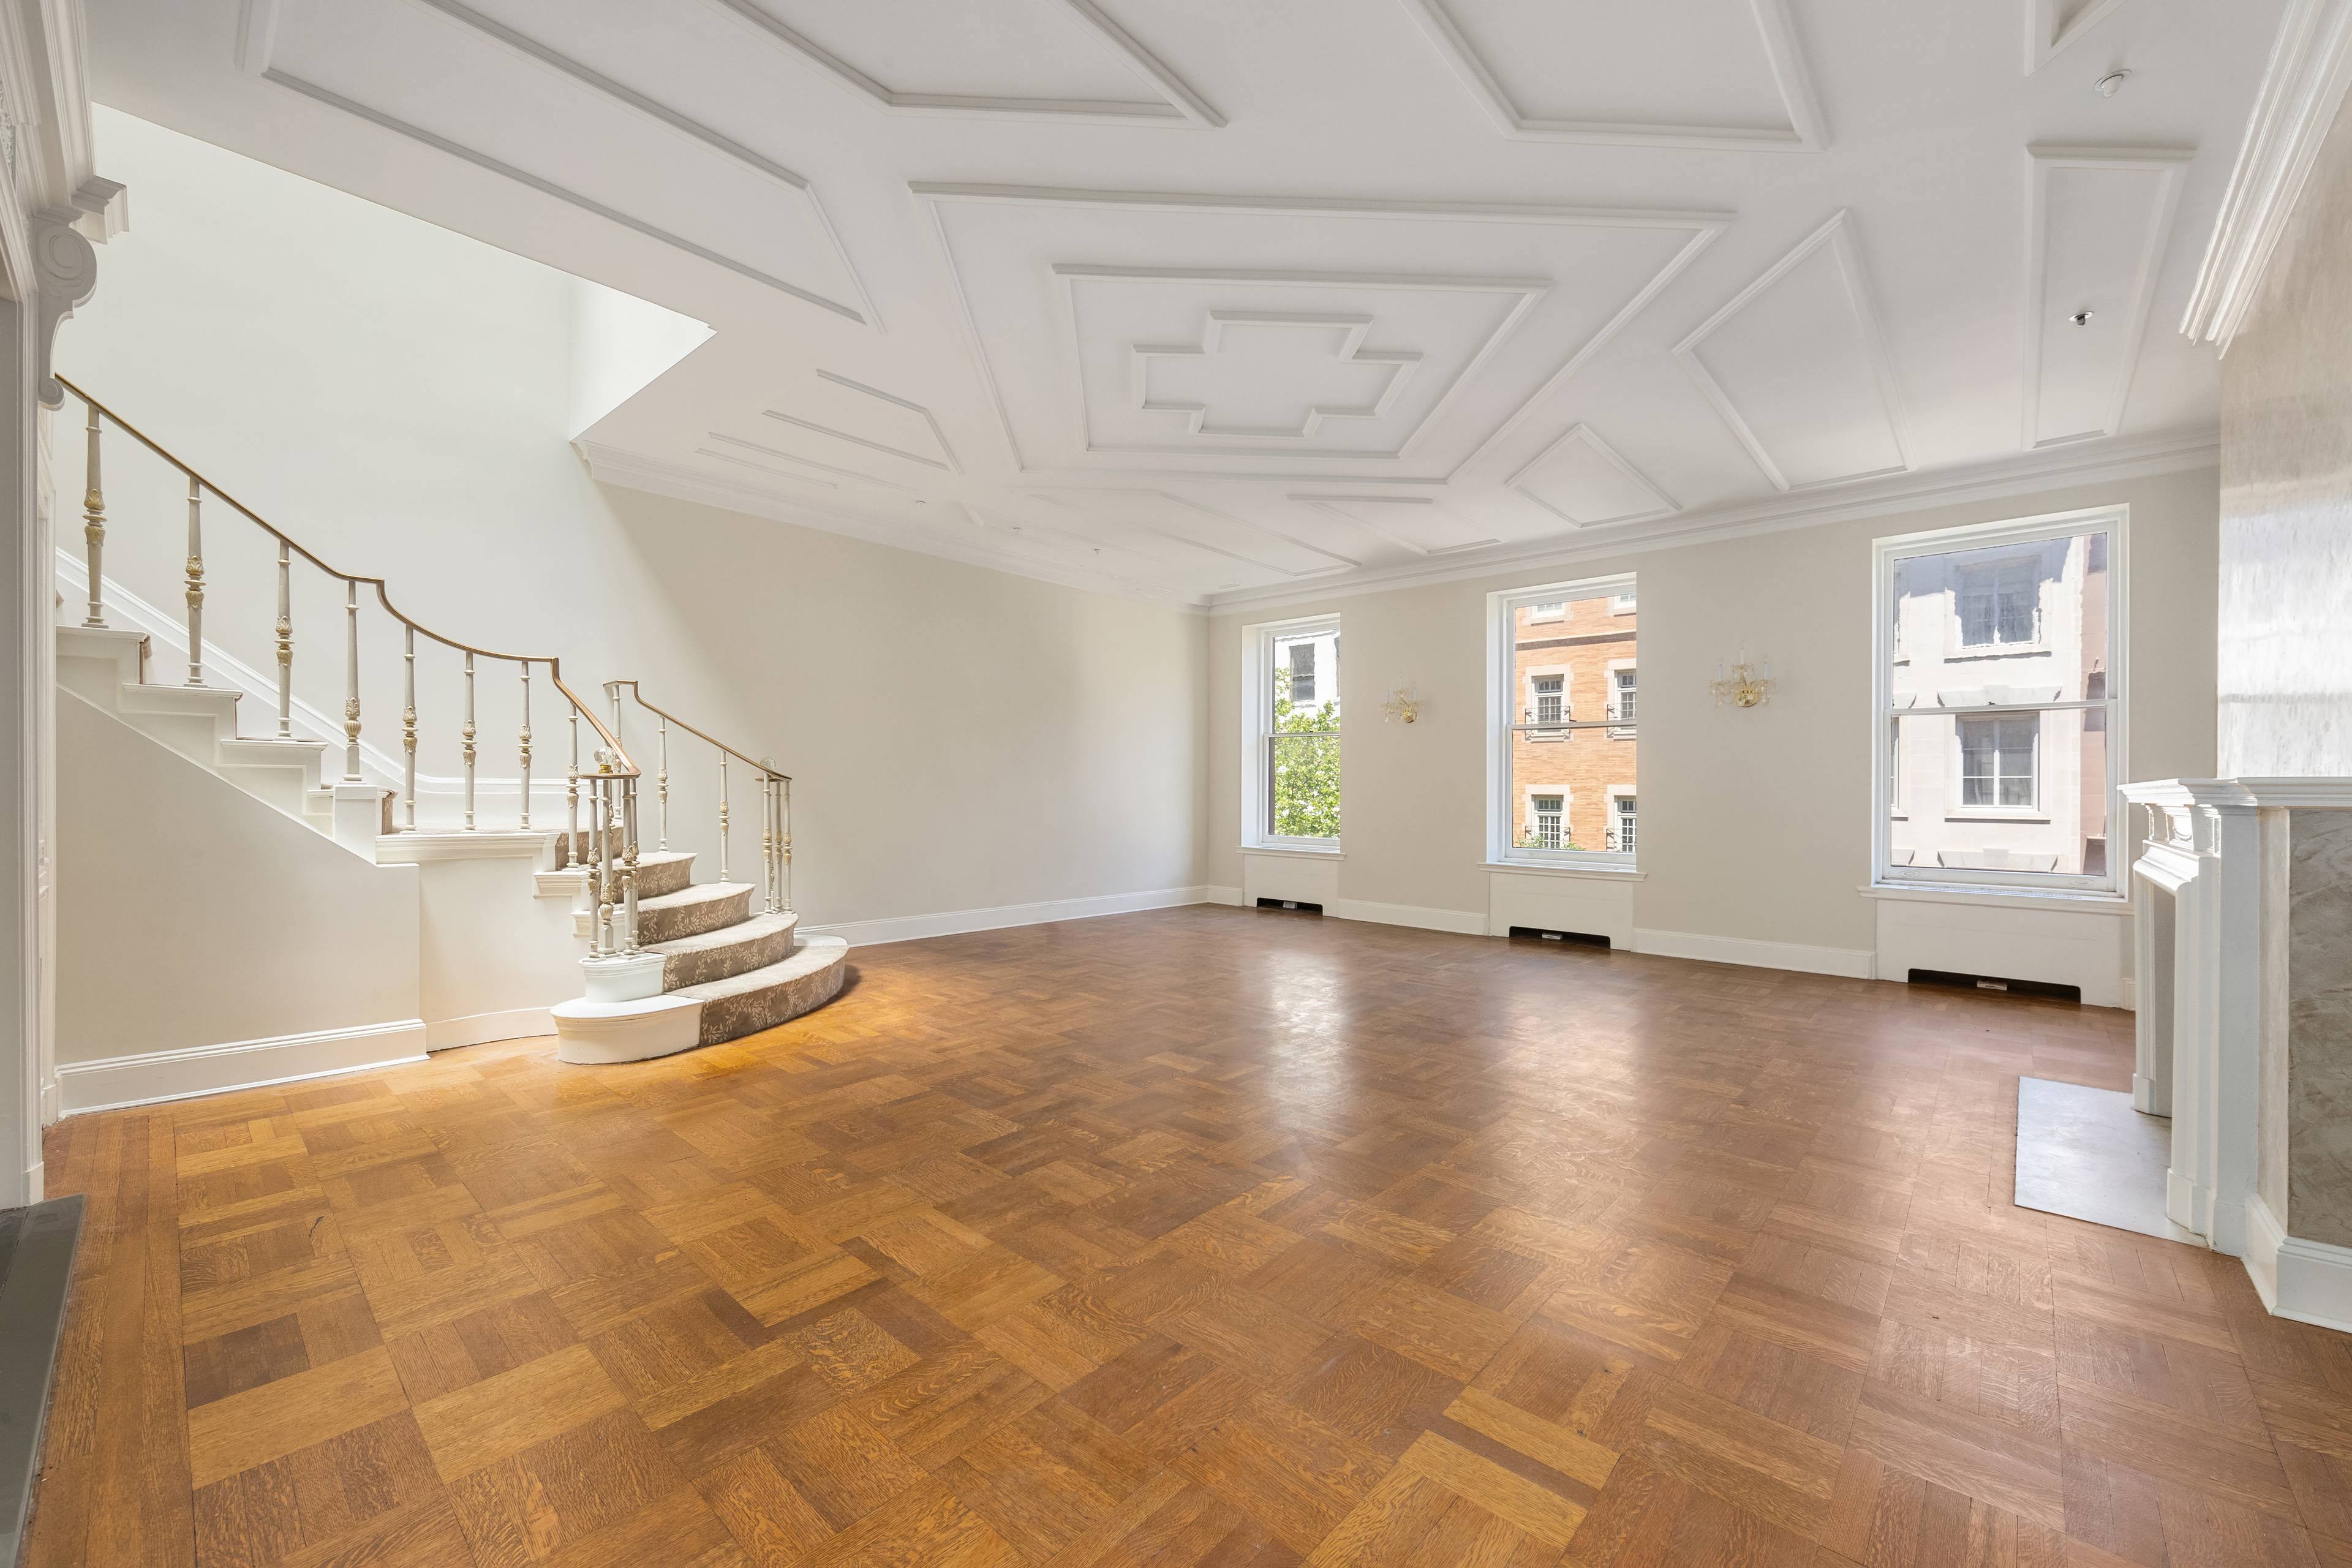 Welcome to residence 4 5 at 8 East 63rd, an exceptional 25 wide townhouse located on a tree lined street between Fifth Avenue and Madison Avenue along with the most ...